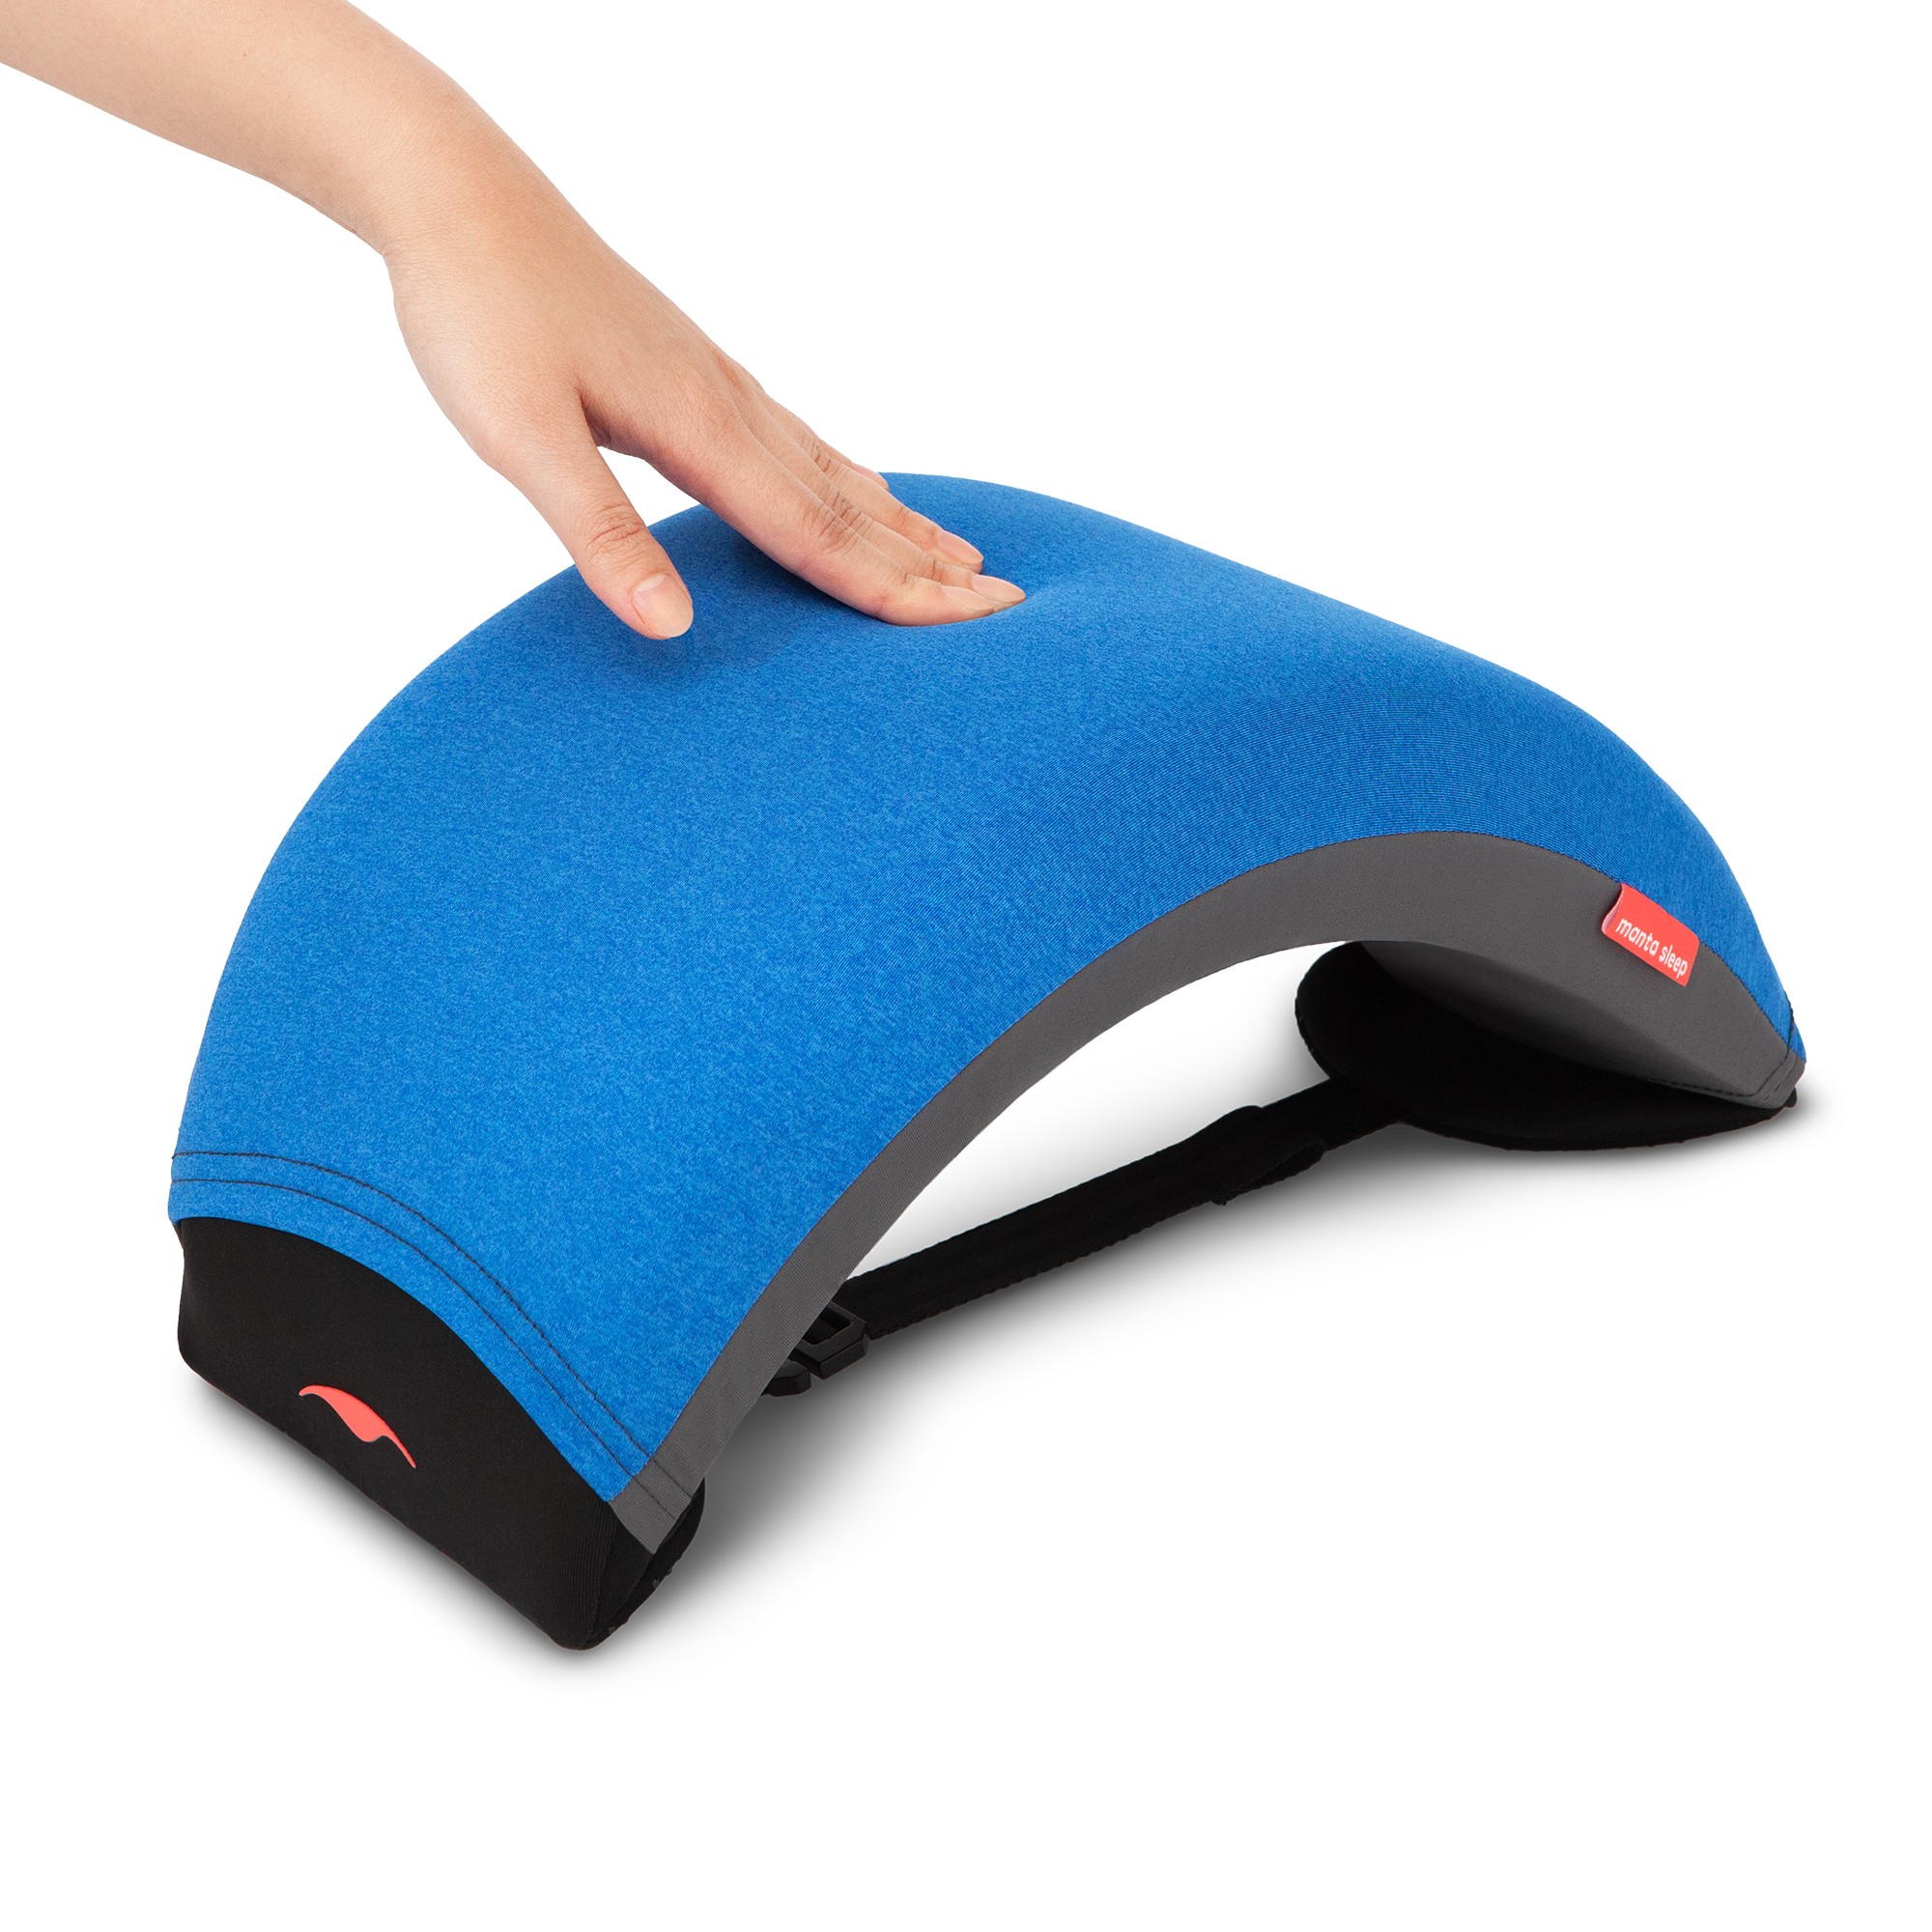 A hand pressing on the surface of a curved nap pillow.